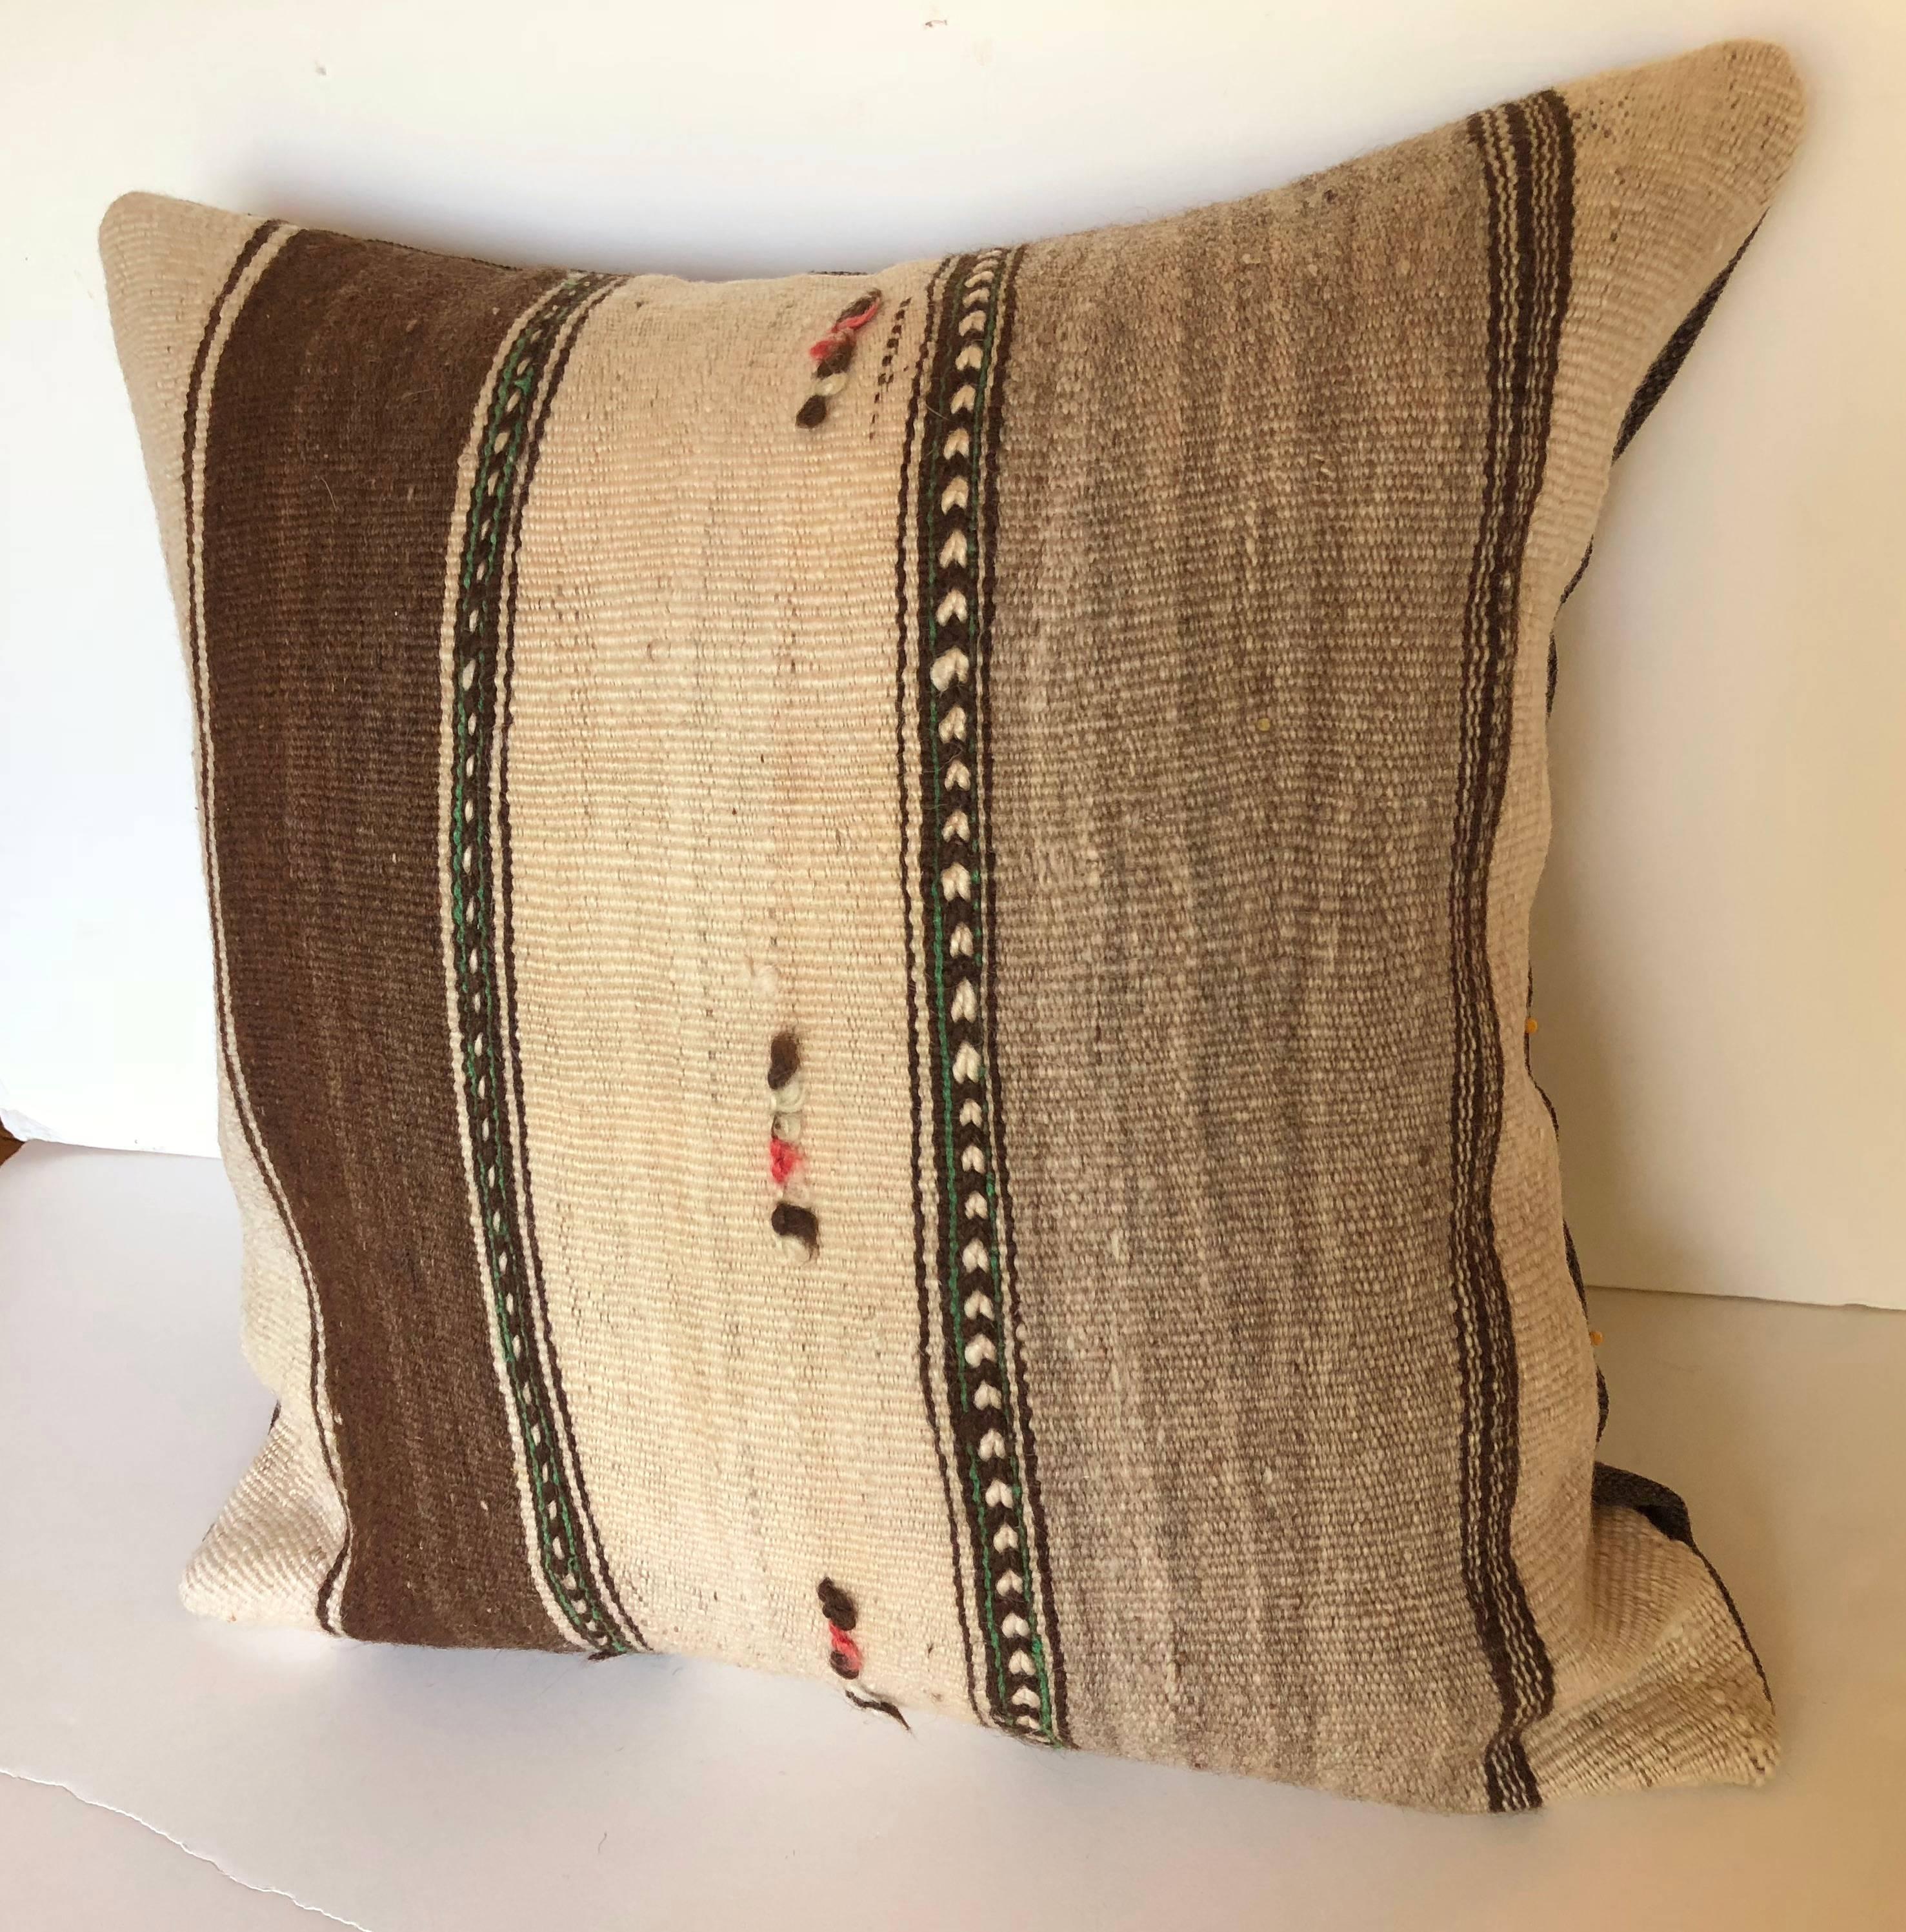 Custom pillows cut from a vintage Moroccan hand loomed wool Berber rug from the Atlas Mountains. Wool is soft and lustrous with stripes in natural colors. Pillows are backed in a brown linen blend, filled with an insert of 50/50 down and feathers